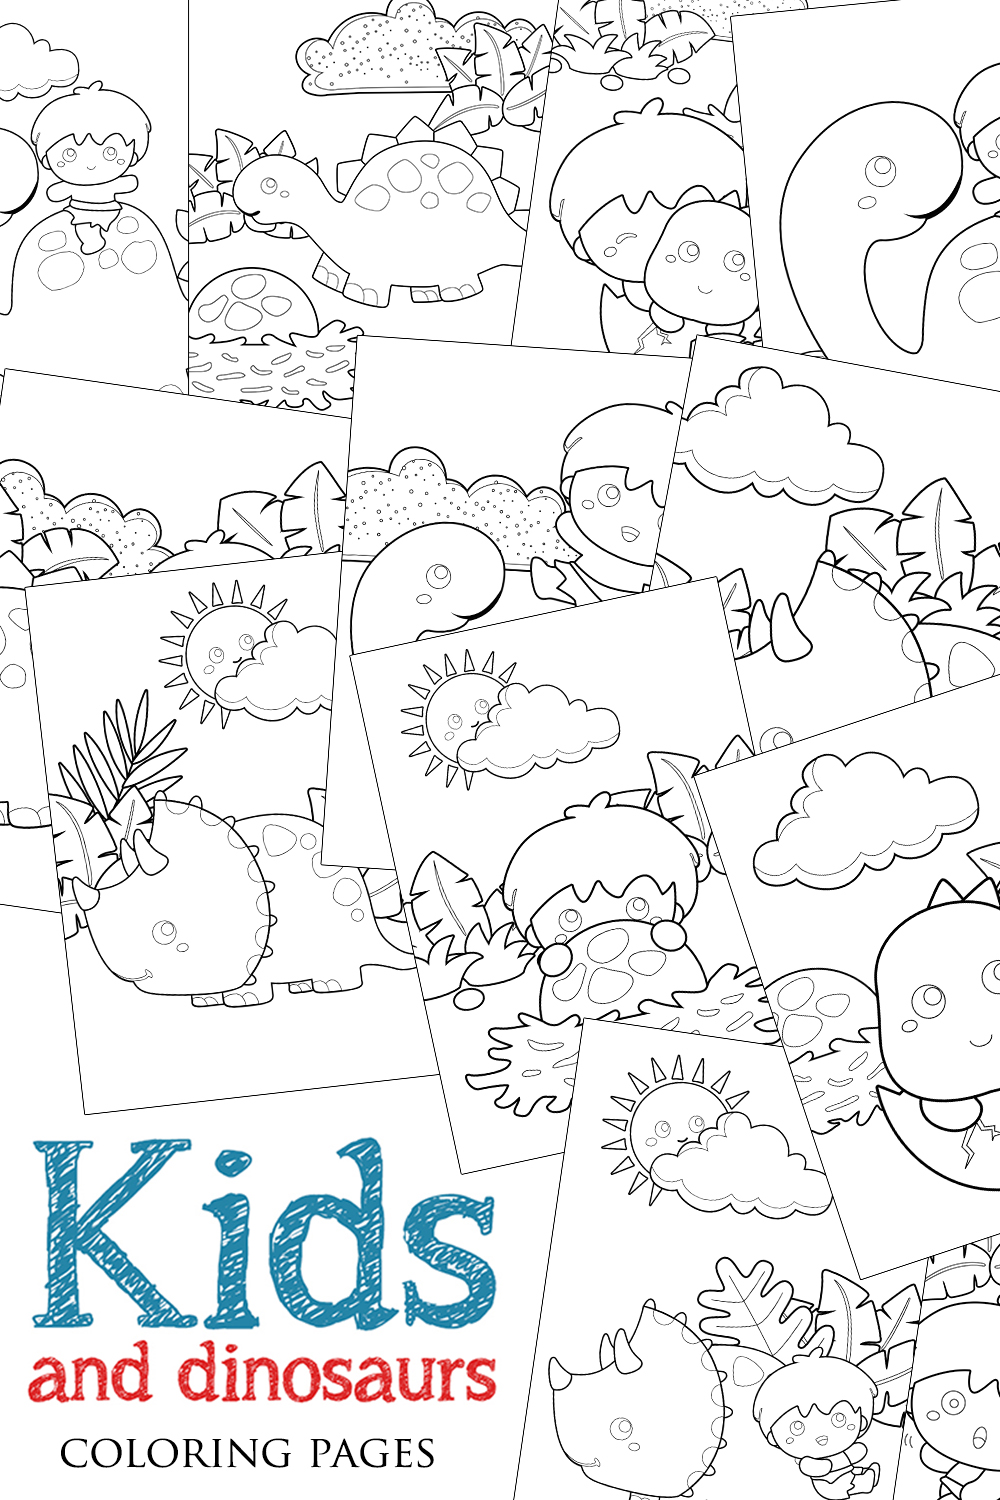 Dinosaurs Coloring Pages Design pinterest image.